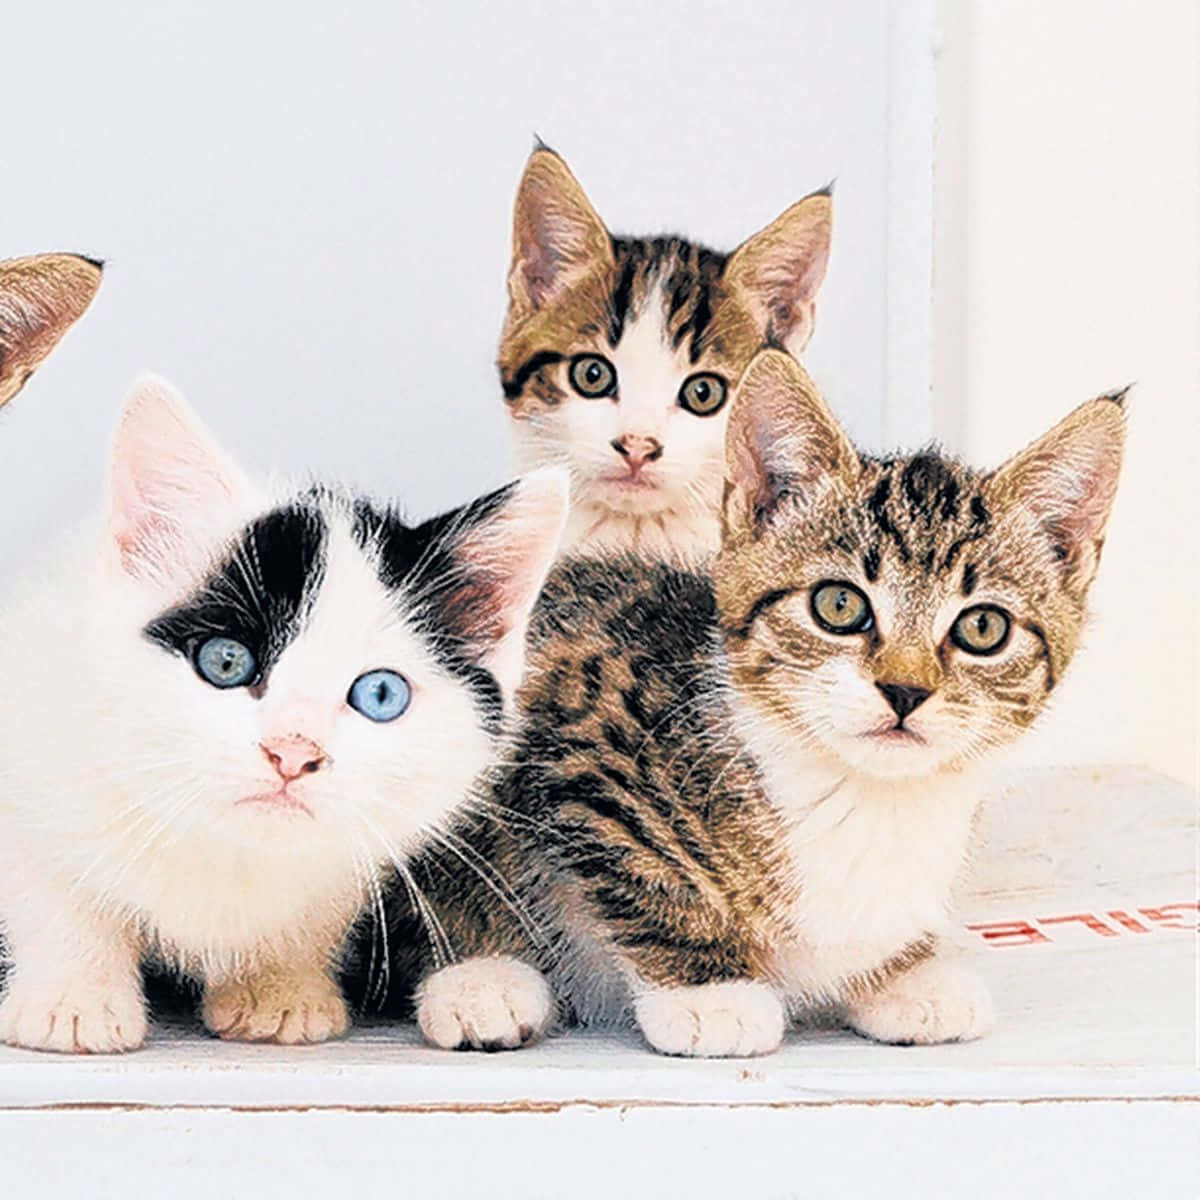 Four Kittens With Blue Eyes Are Sitting On A White Table